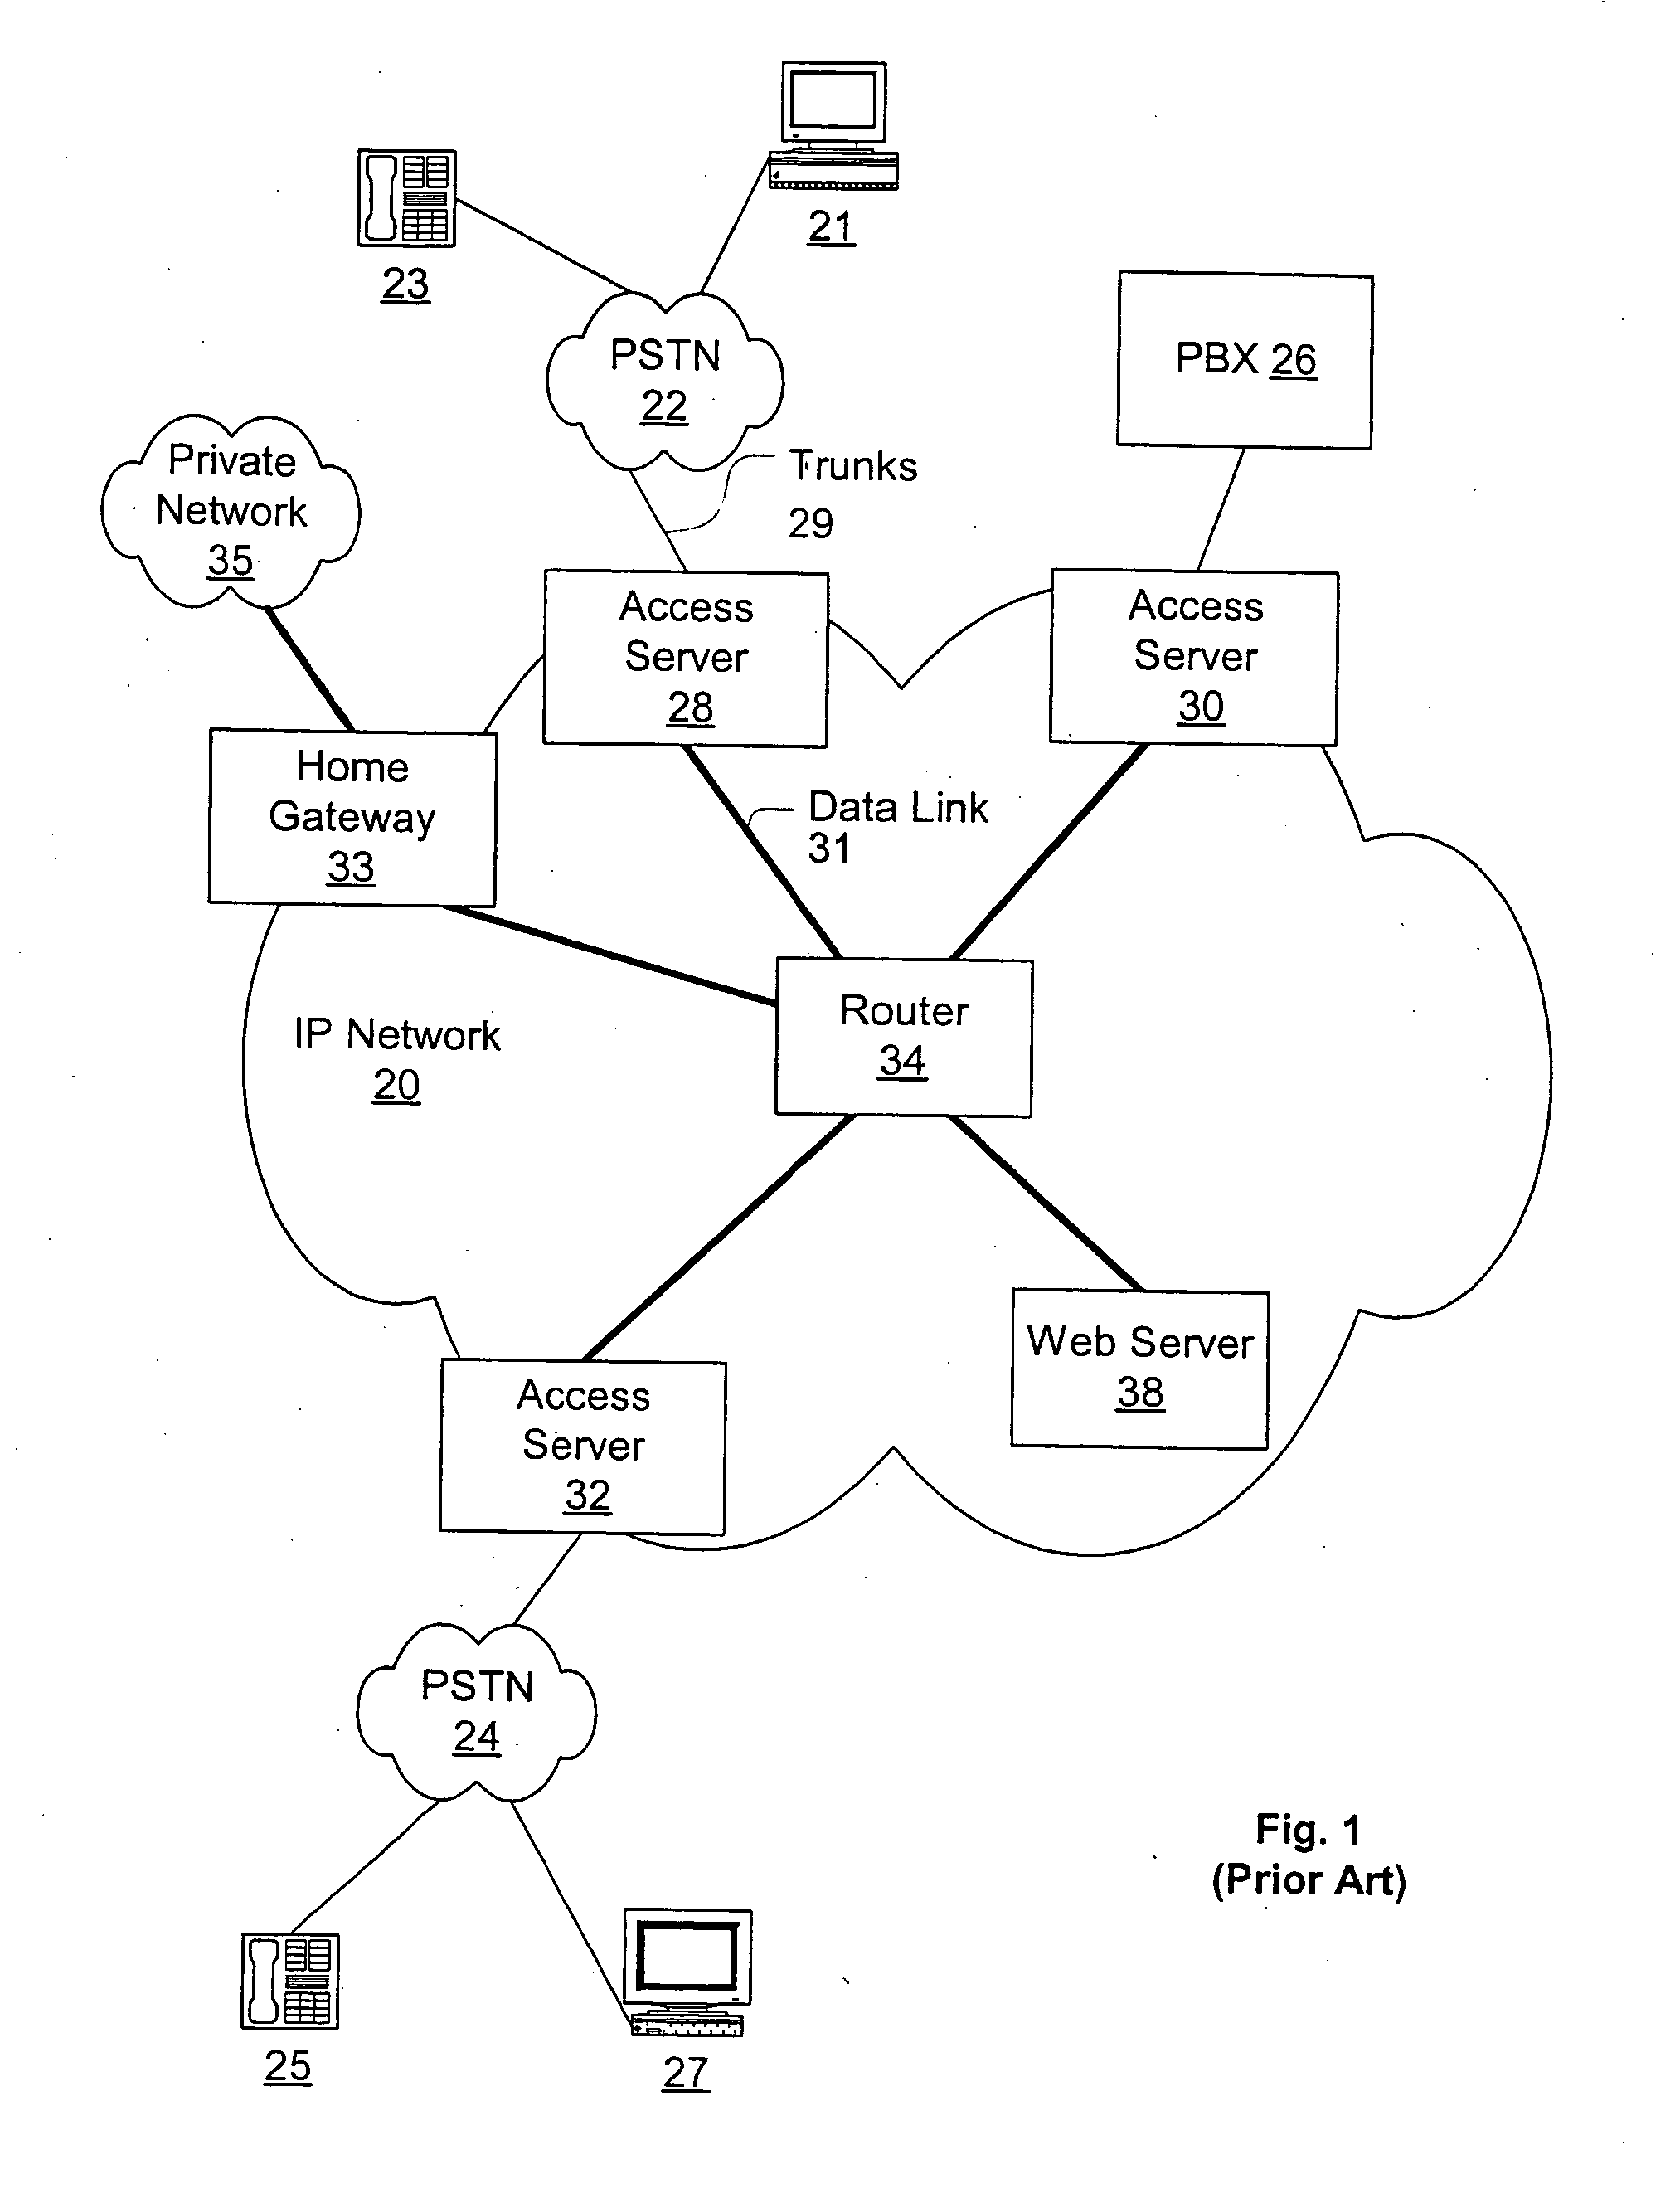 Distributed packet processing architecture for network access servers